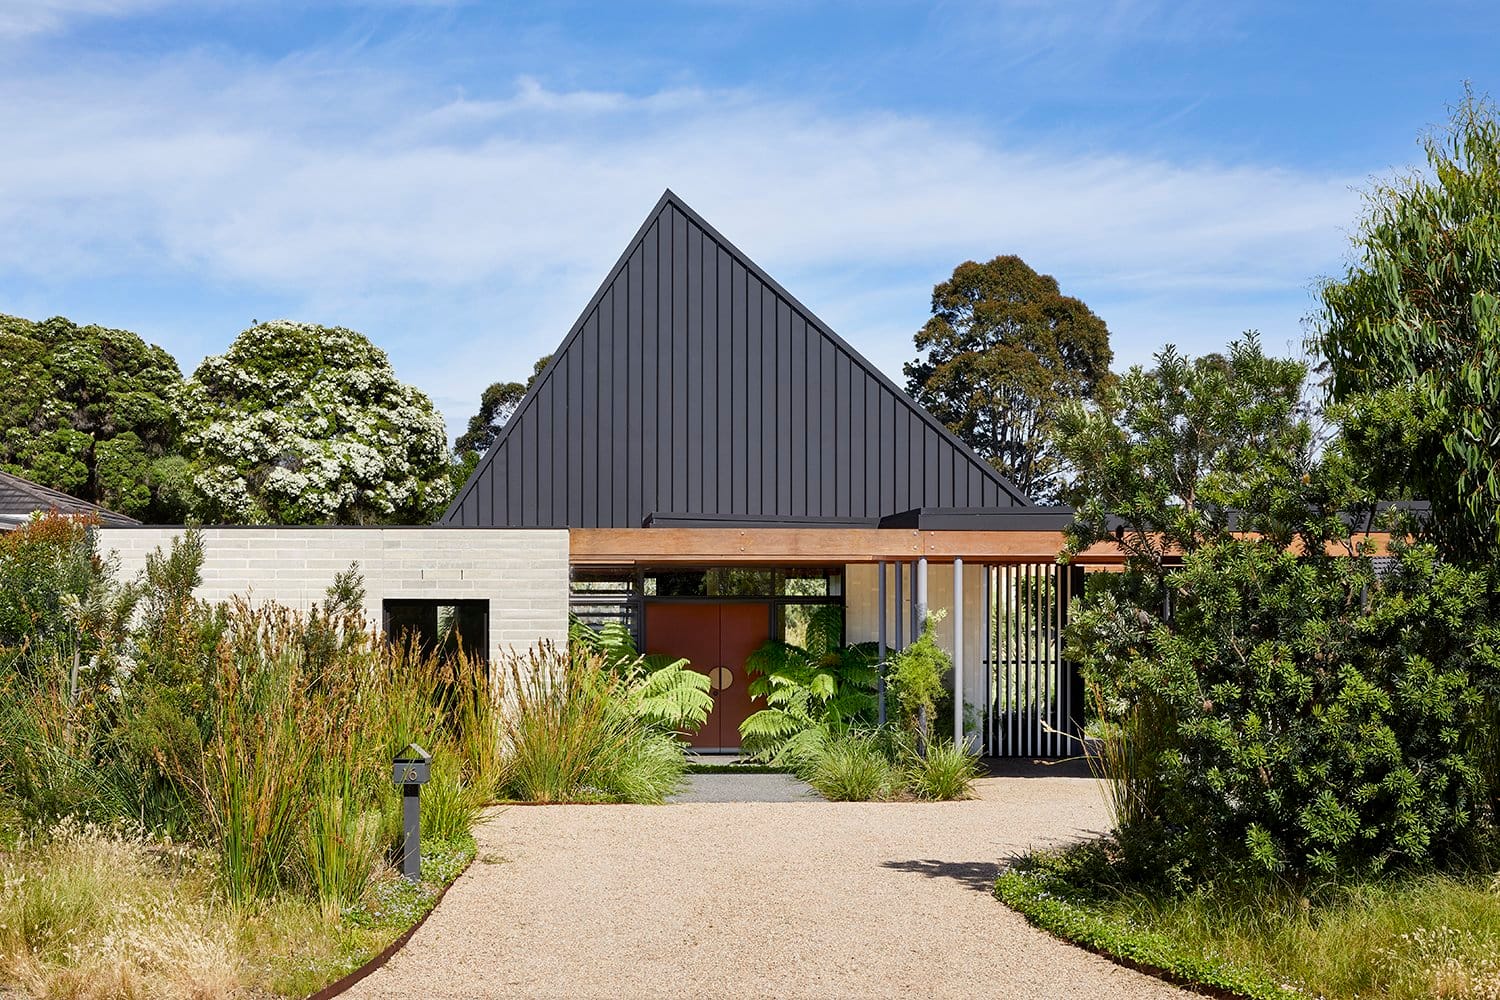 Mt Eliza House by BENT Architecture. Photography by Tatjana Plitt. Pitched roof on single story brick home with gravel driveway. Surrounded by tall, wild bushes and trees. 